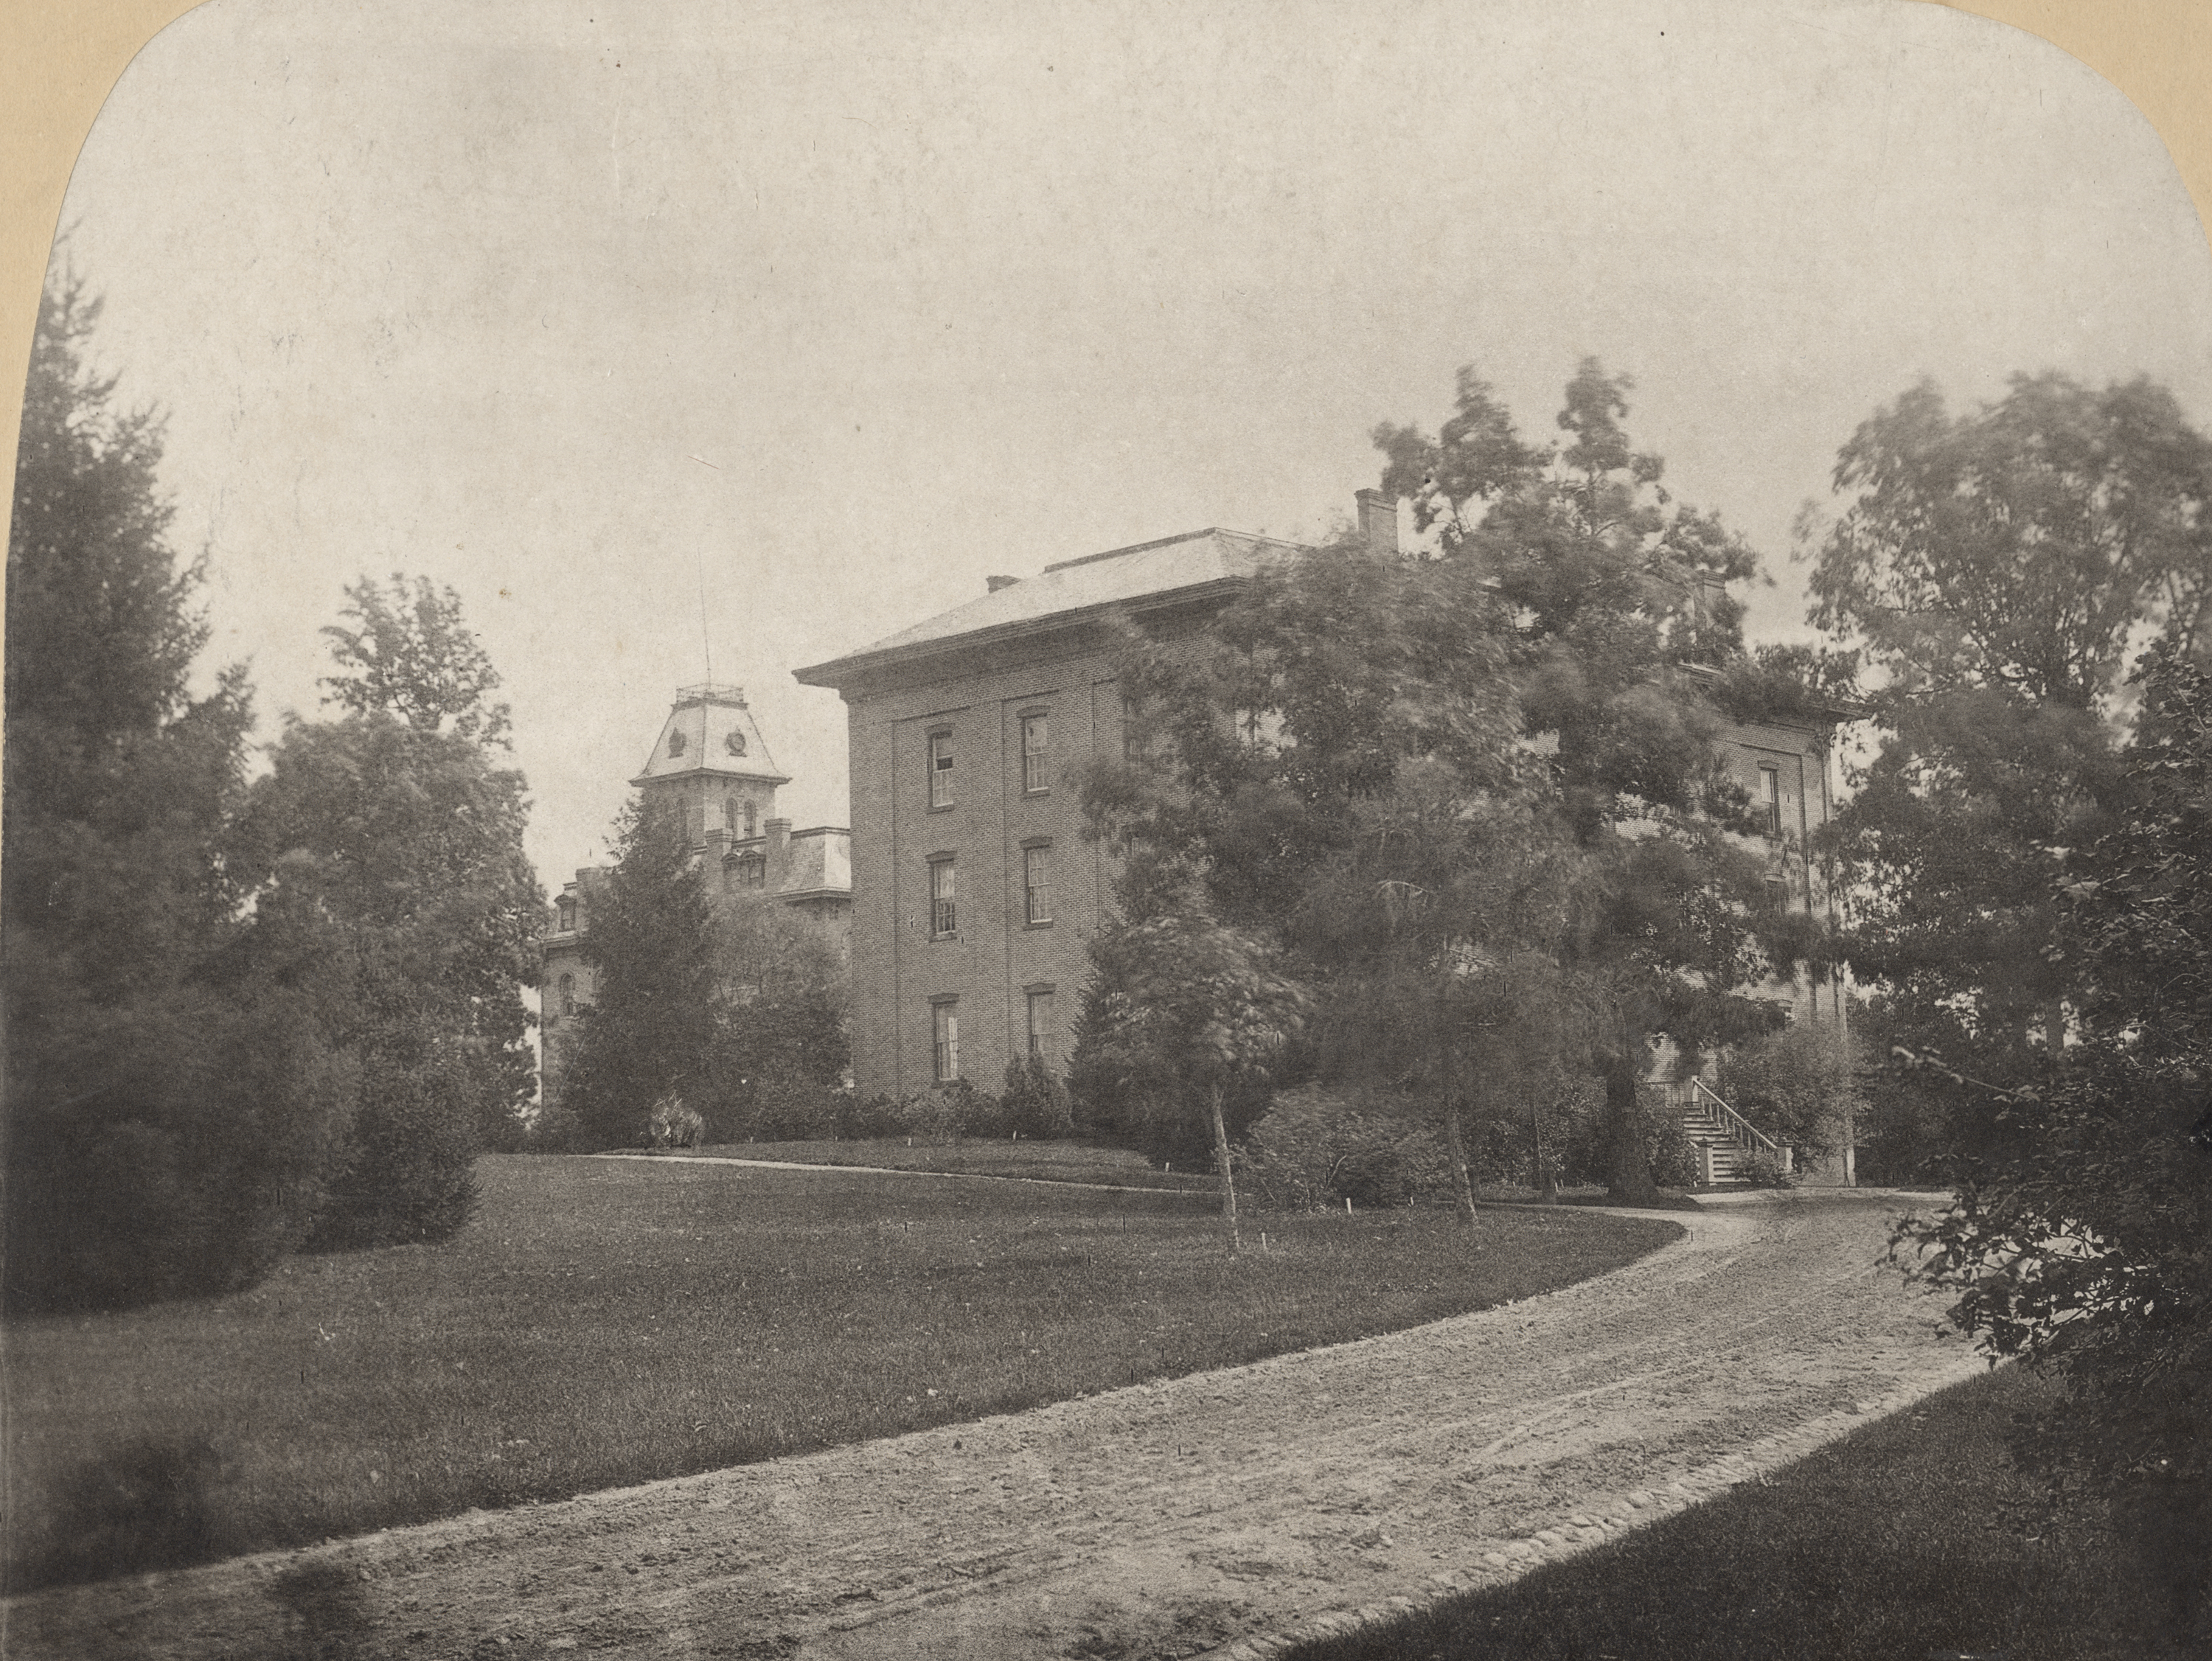 A view of the road leading up to College Hall, date unknown